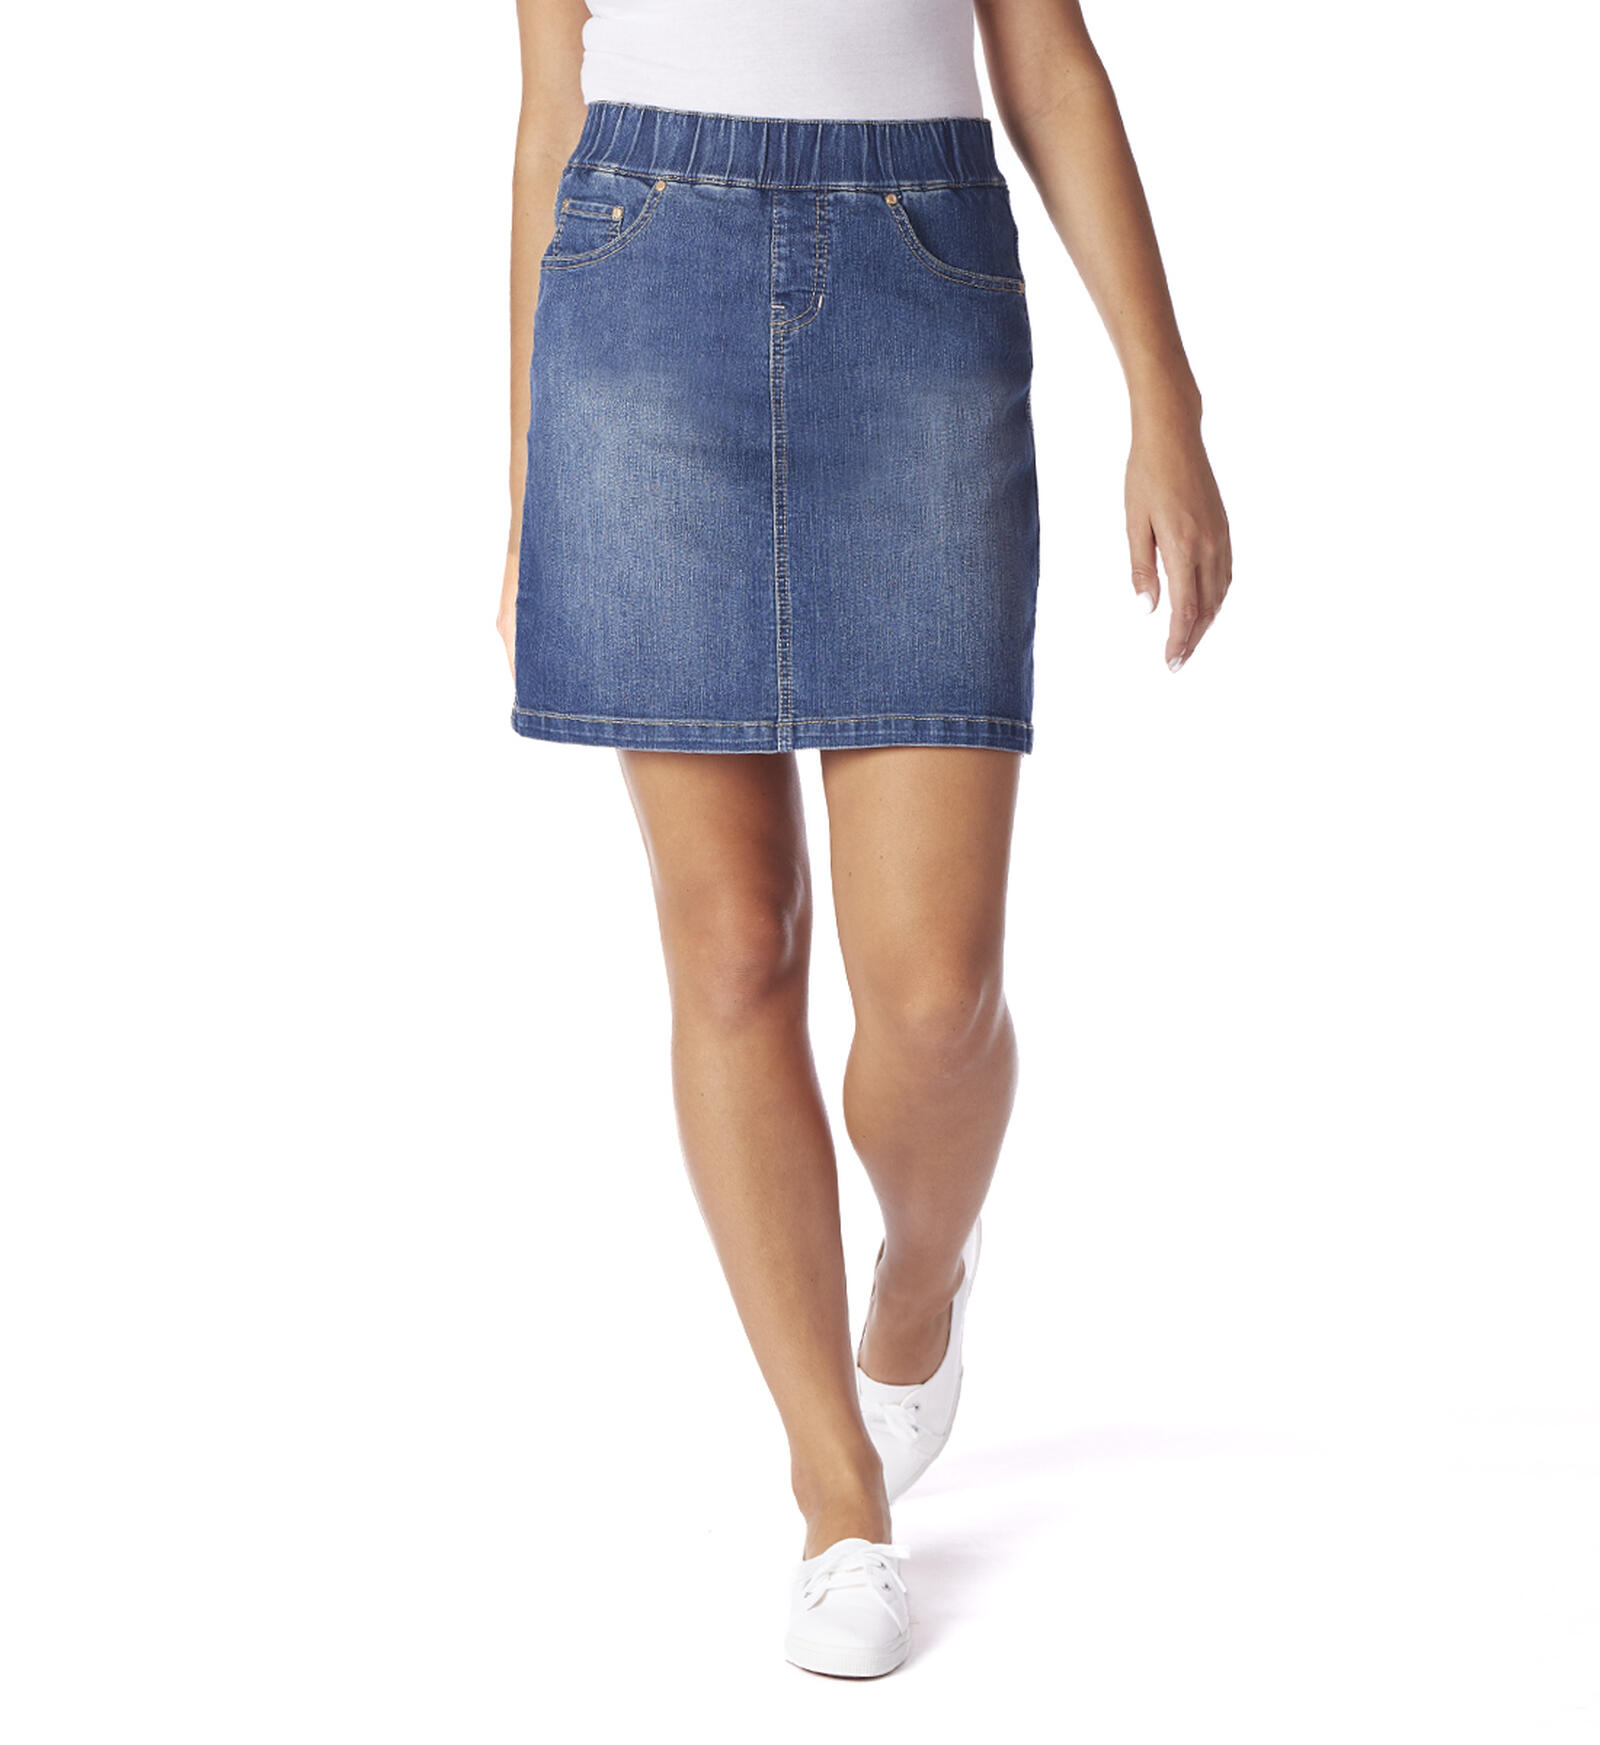 Buy On The Go Skort for USD 69.00 | Jag Jeans US New